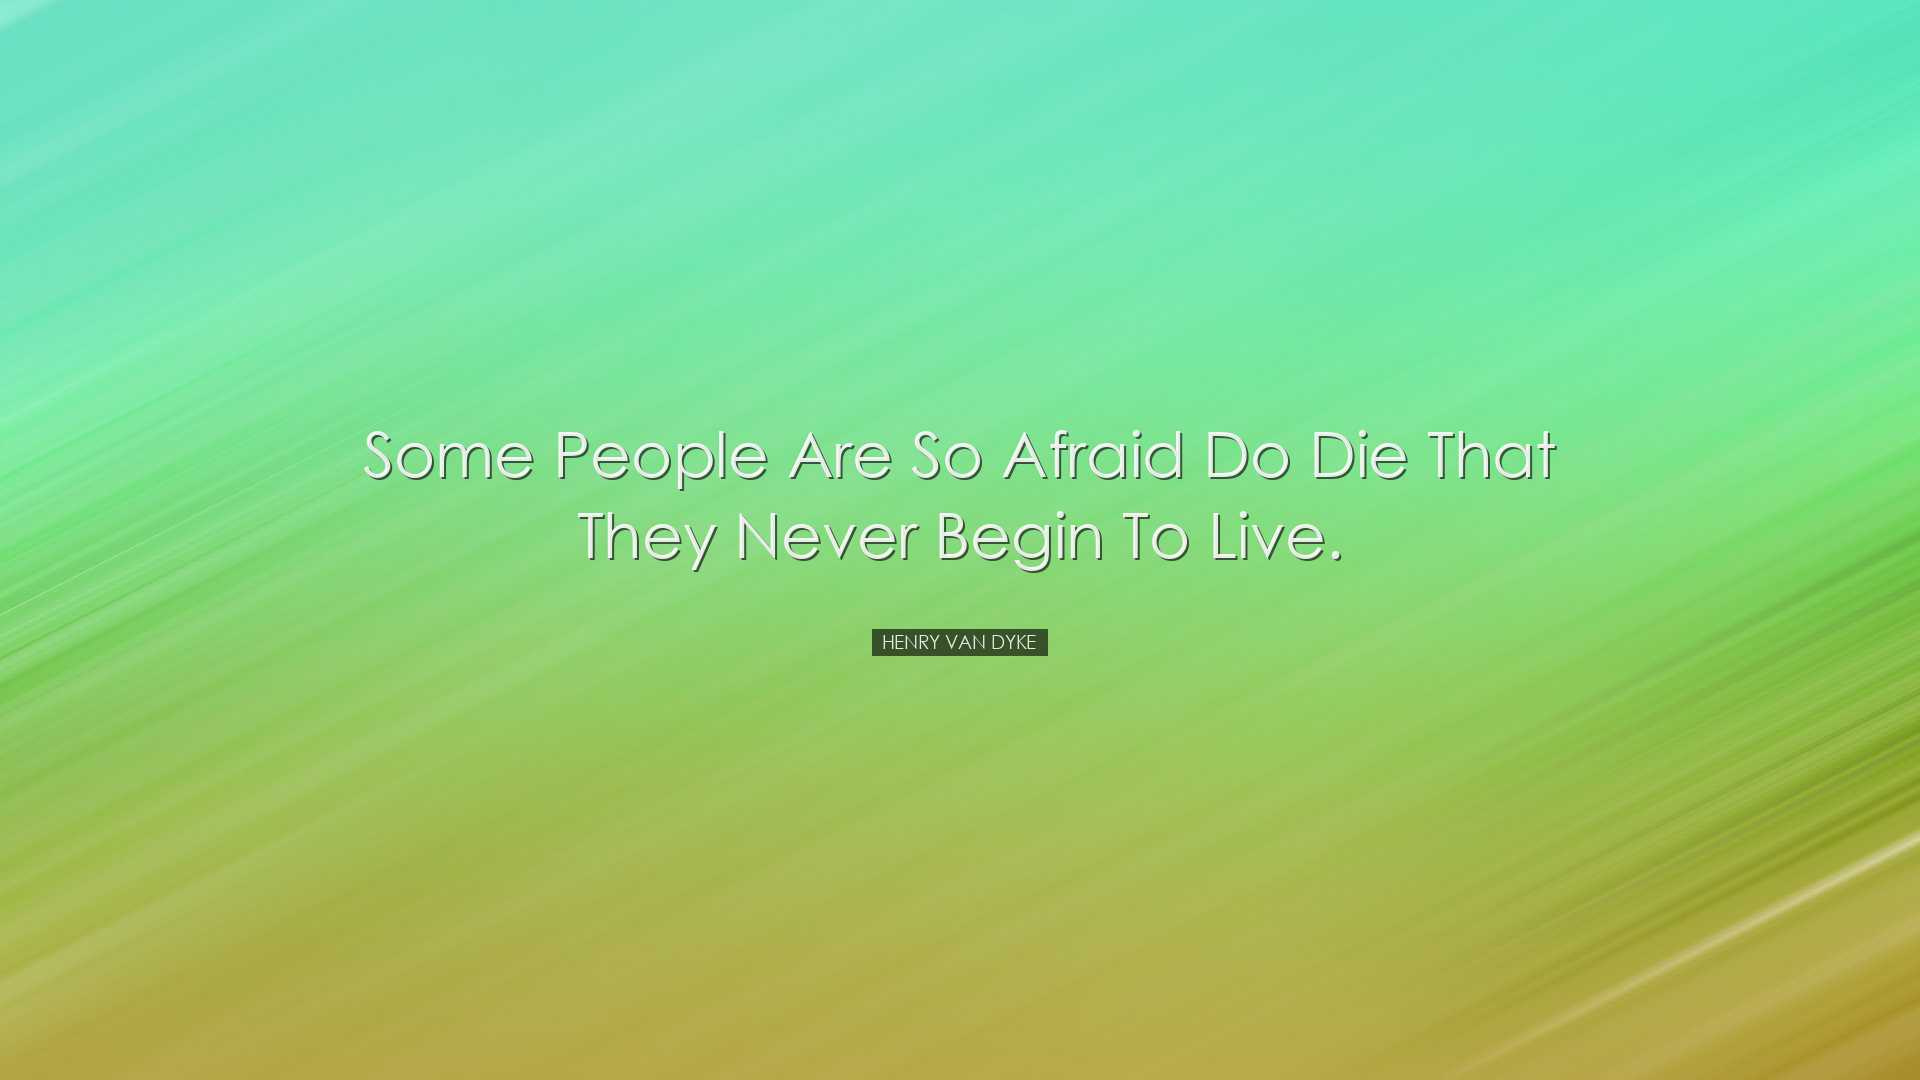 Some people are so afraid do die that they never begin to live. -